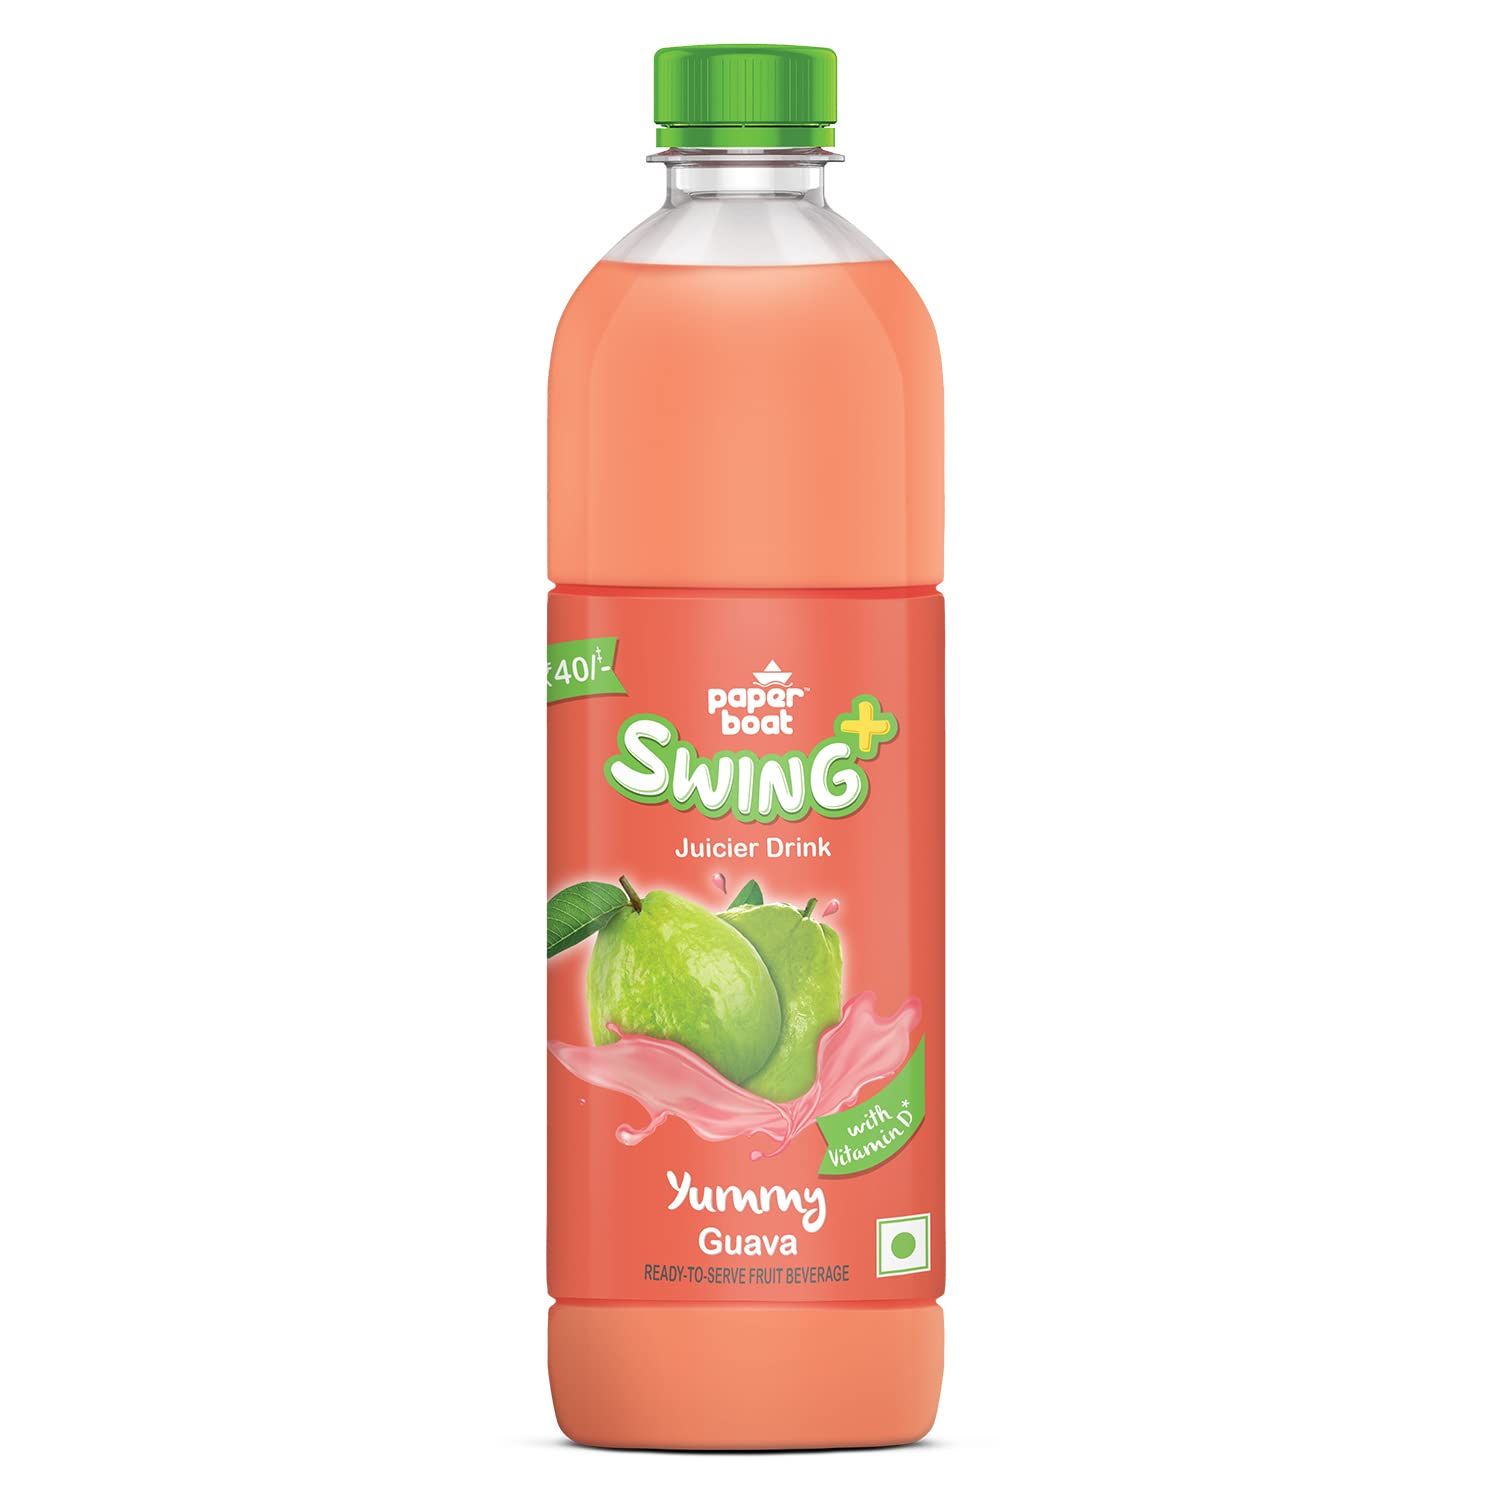 Paper Boat Swing Yummy Guava Juice Image